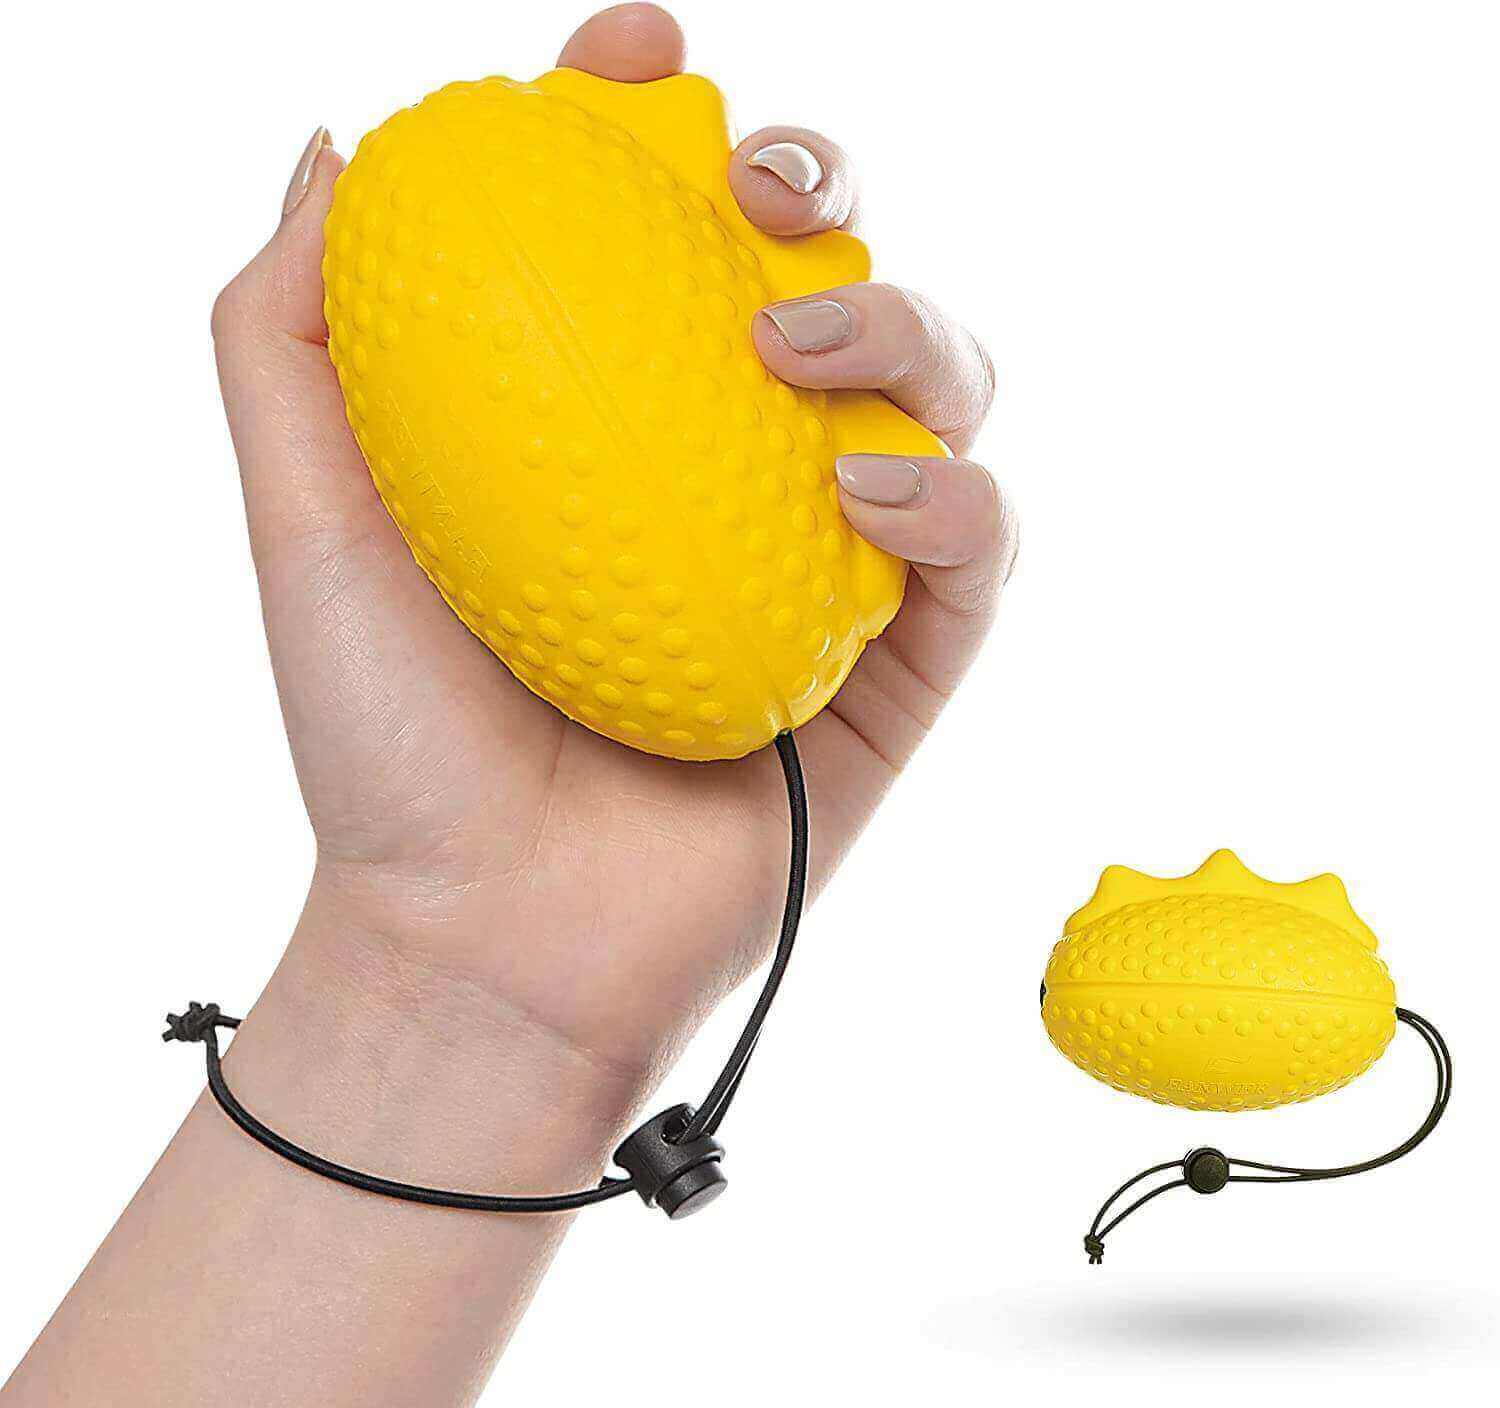 Stress ball on adjustable string, feature image